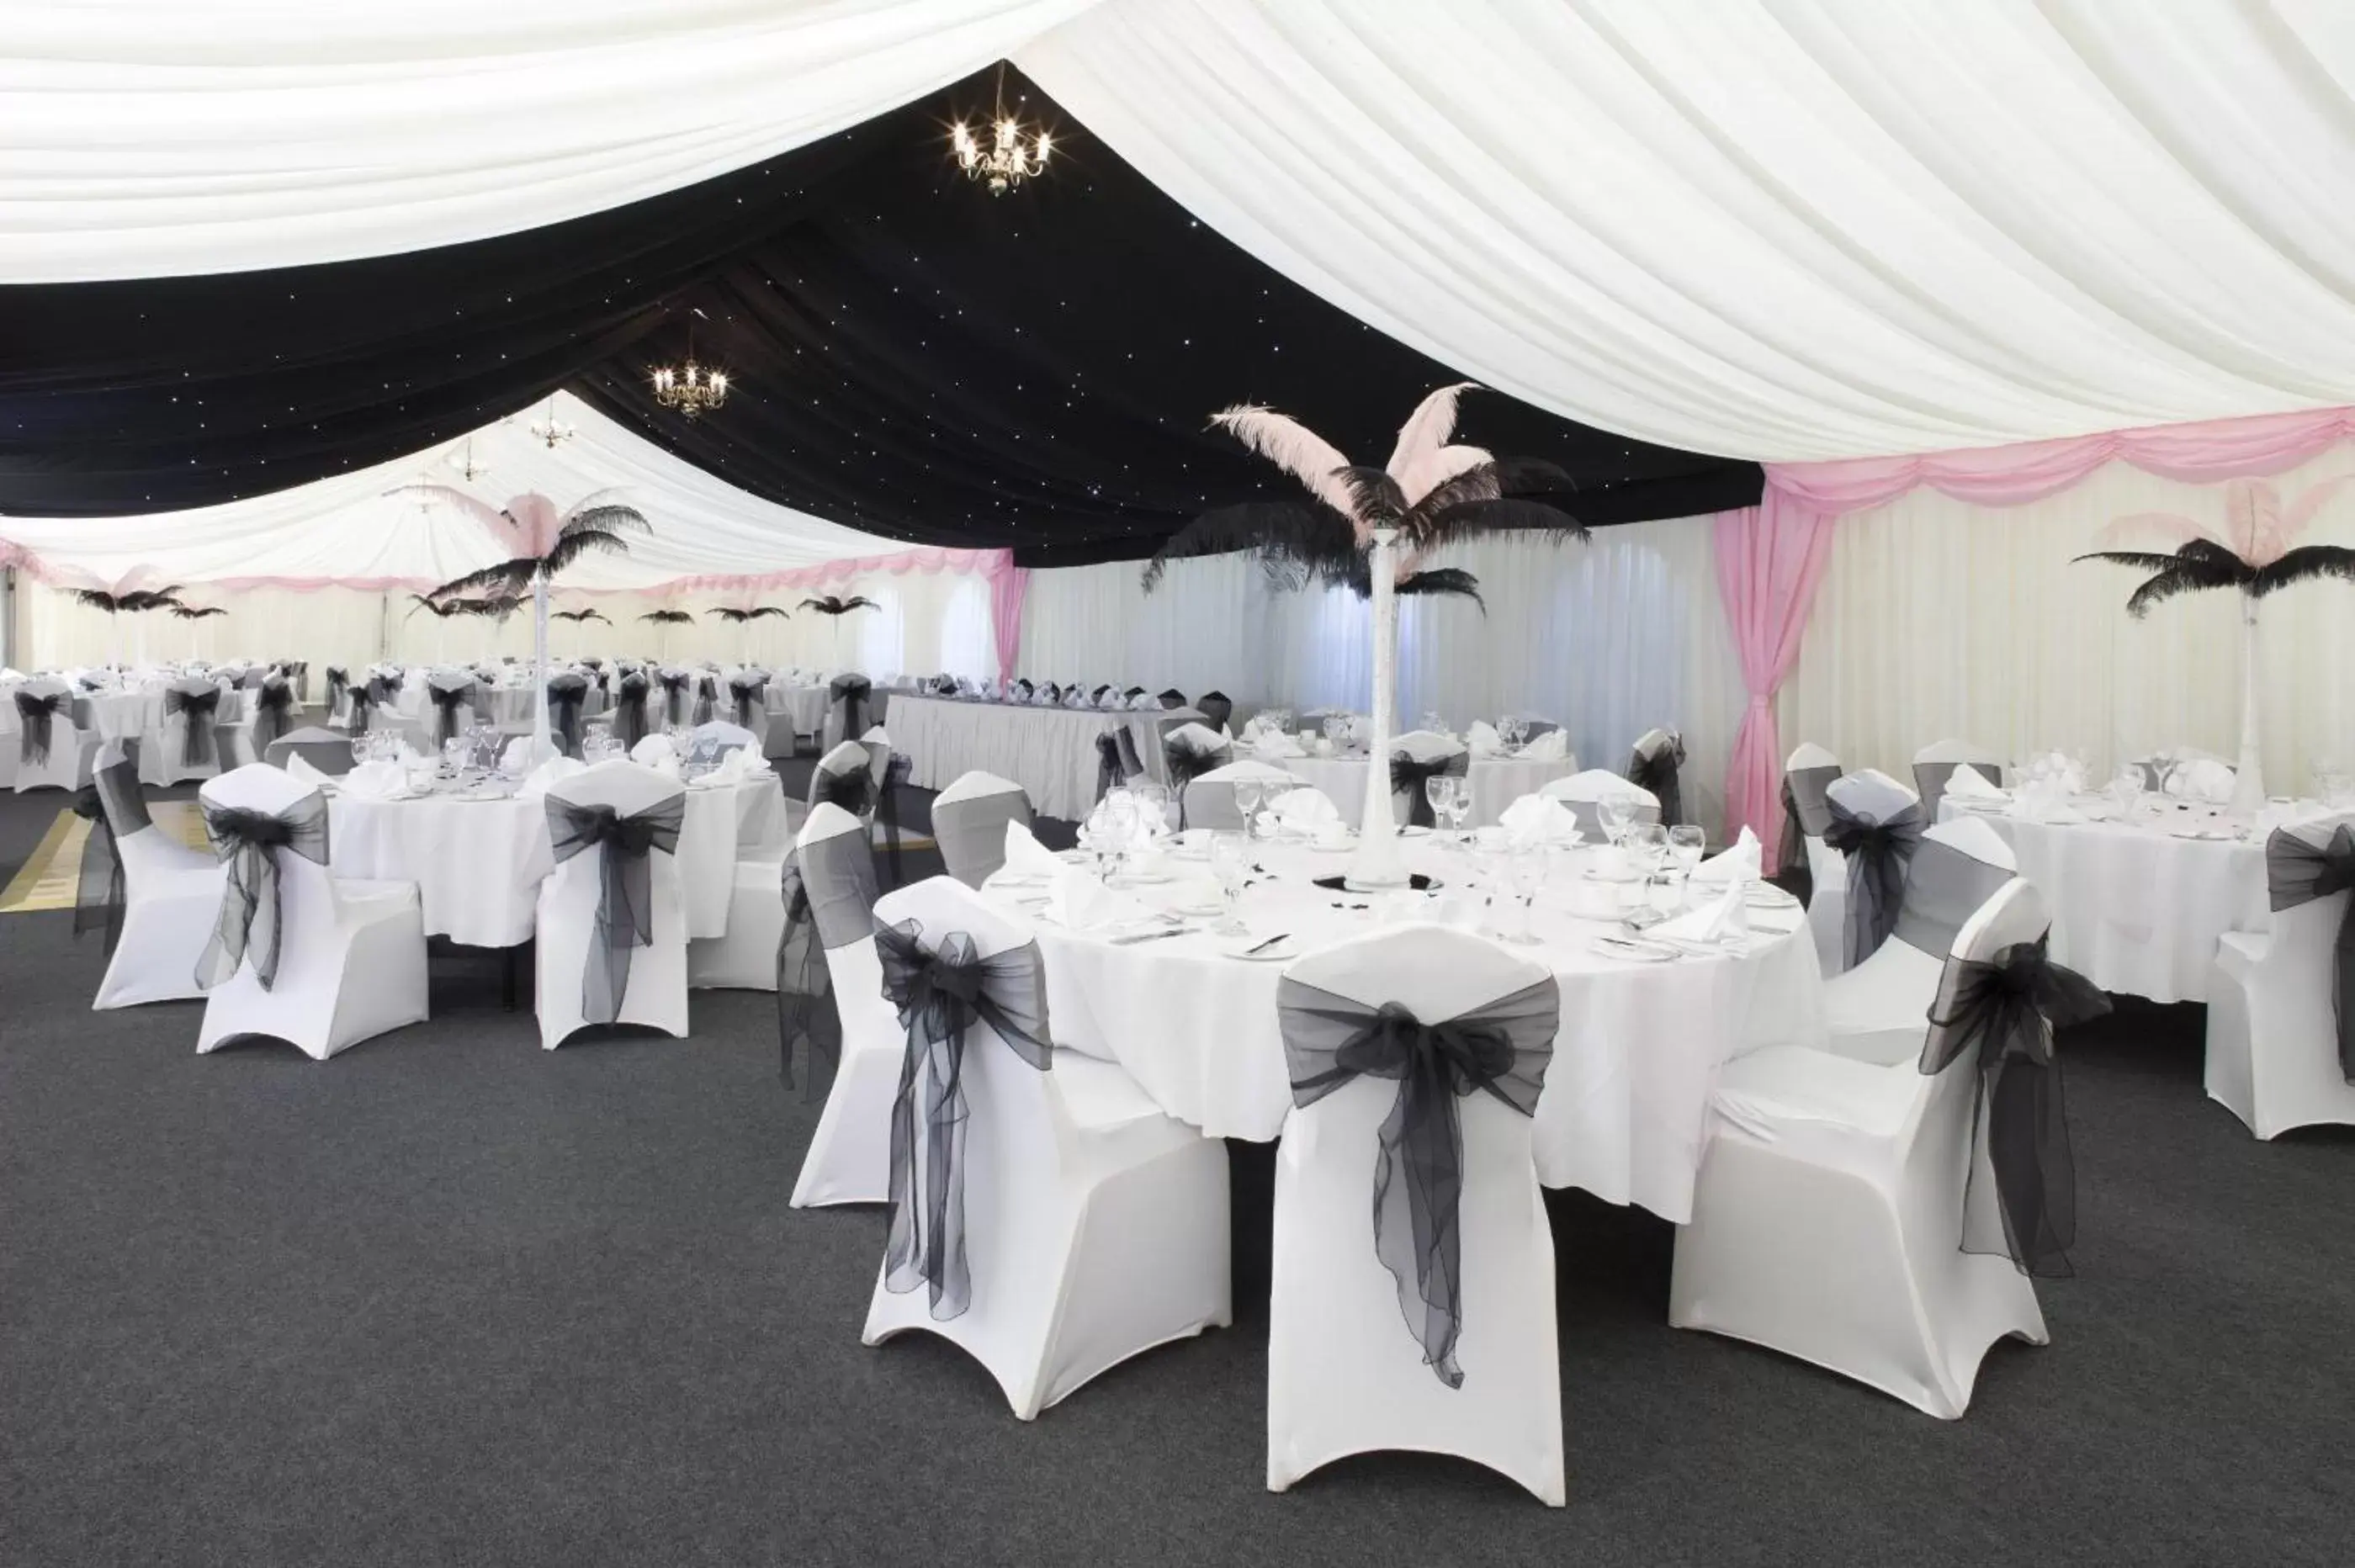 Banquet/Function facilities, Banquet Facilities in Holiday Inn Dover, an IHG Hotel